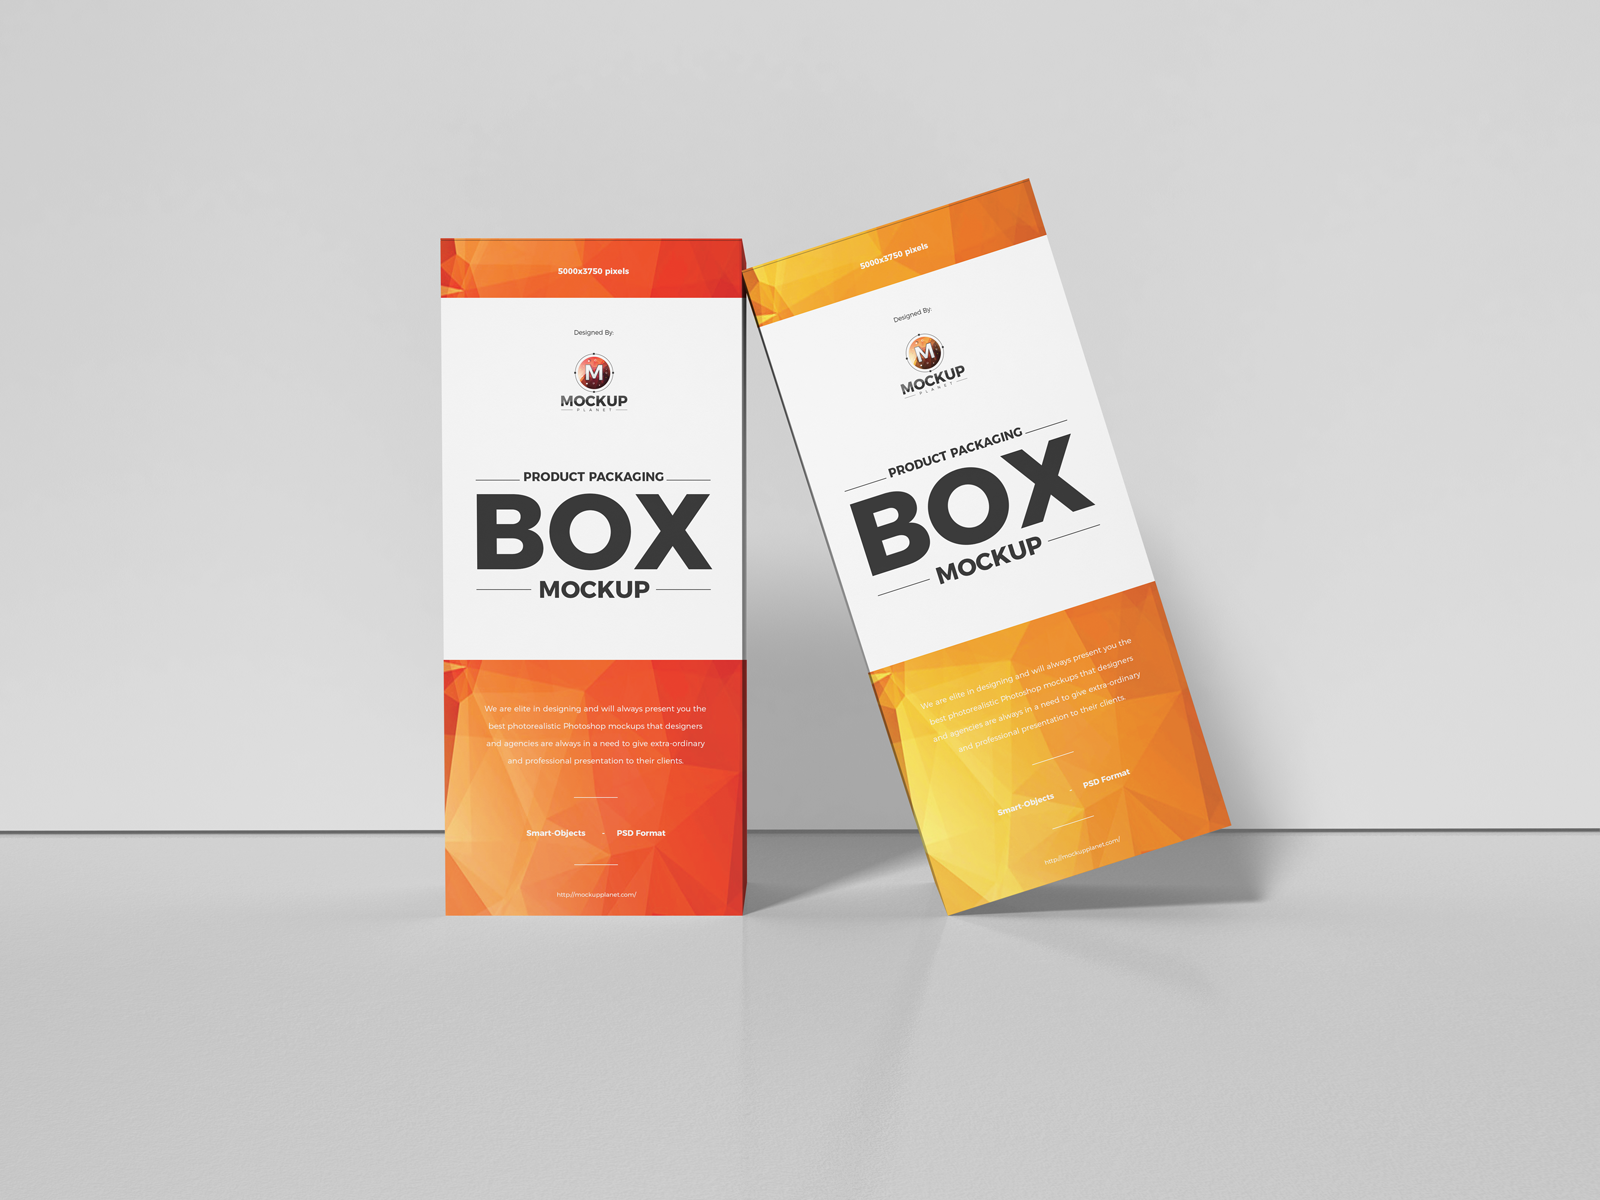 Download Free Product Packaging Box Mockup Design by Mockup Planet on Dribbble